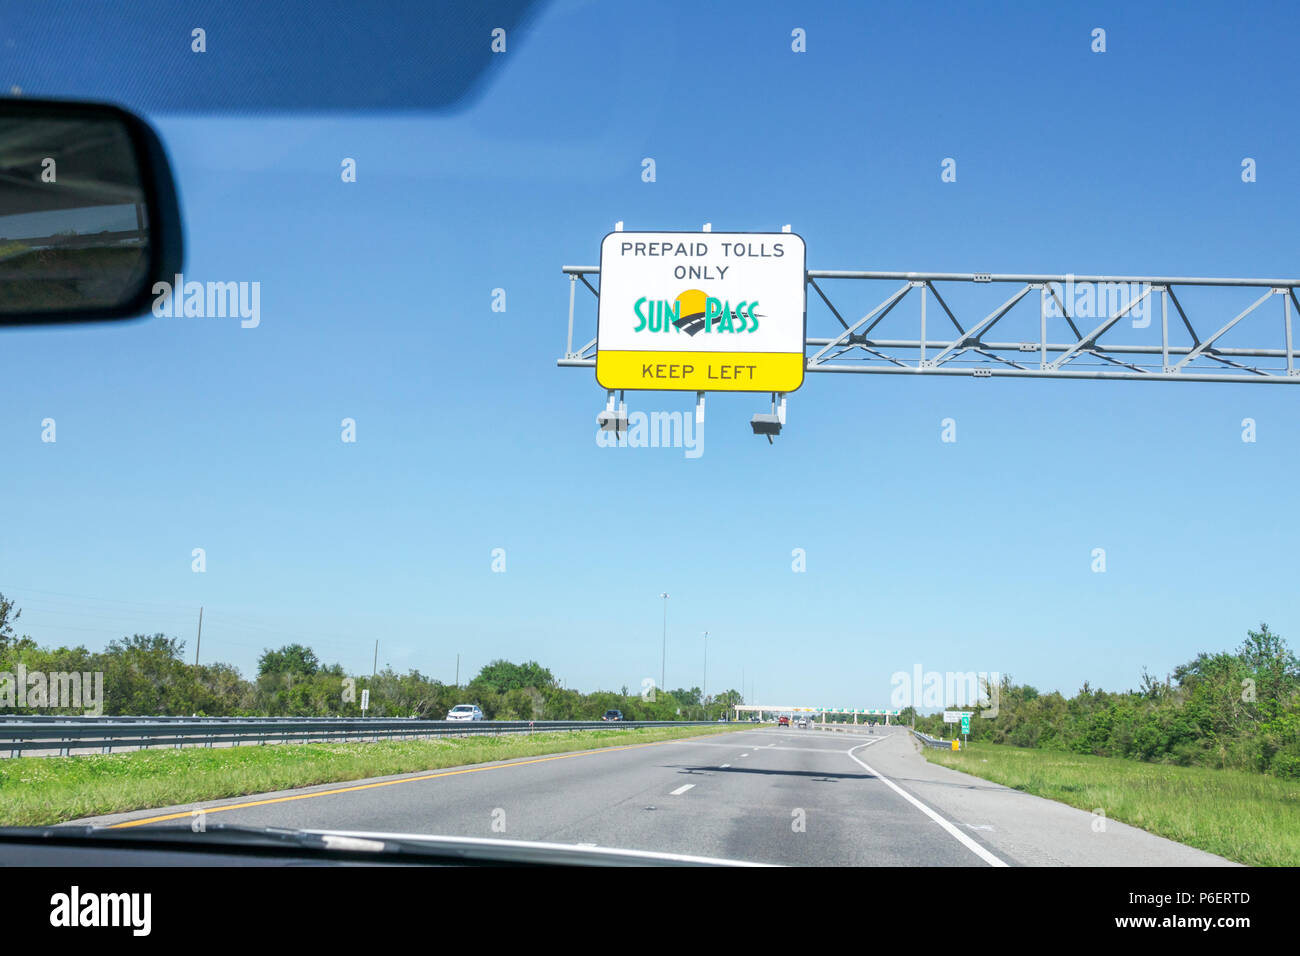 Fort Ft. Lauderdale Florida,Florida's Turnpike toll road plaza,SunPass prepaid electronic toll collection system,traffic,lane sign,highway,visitors tr Stock Photo